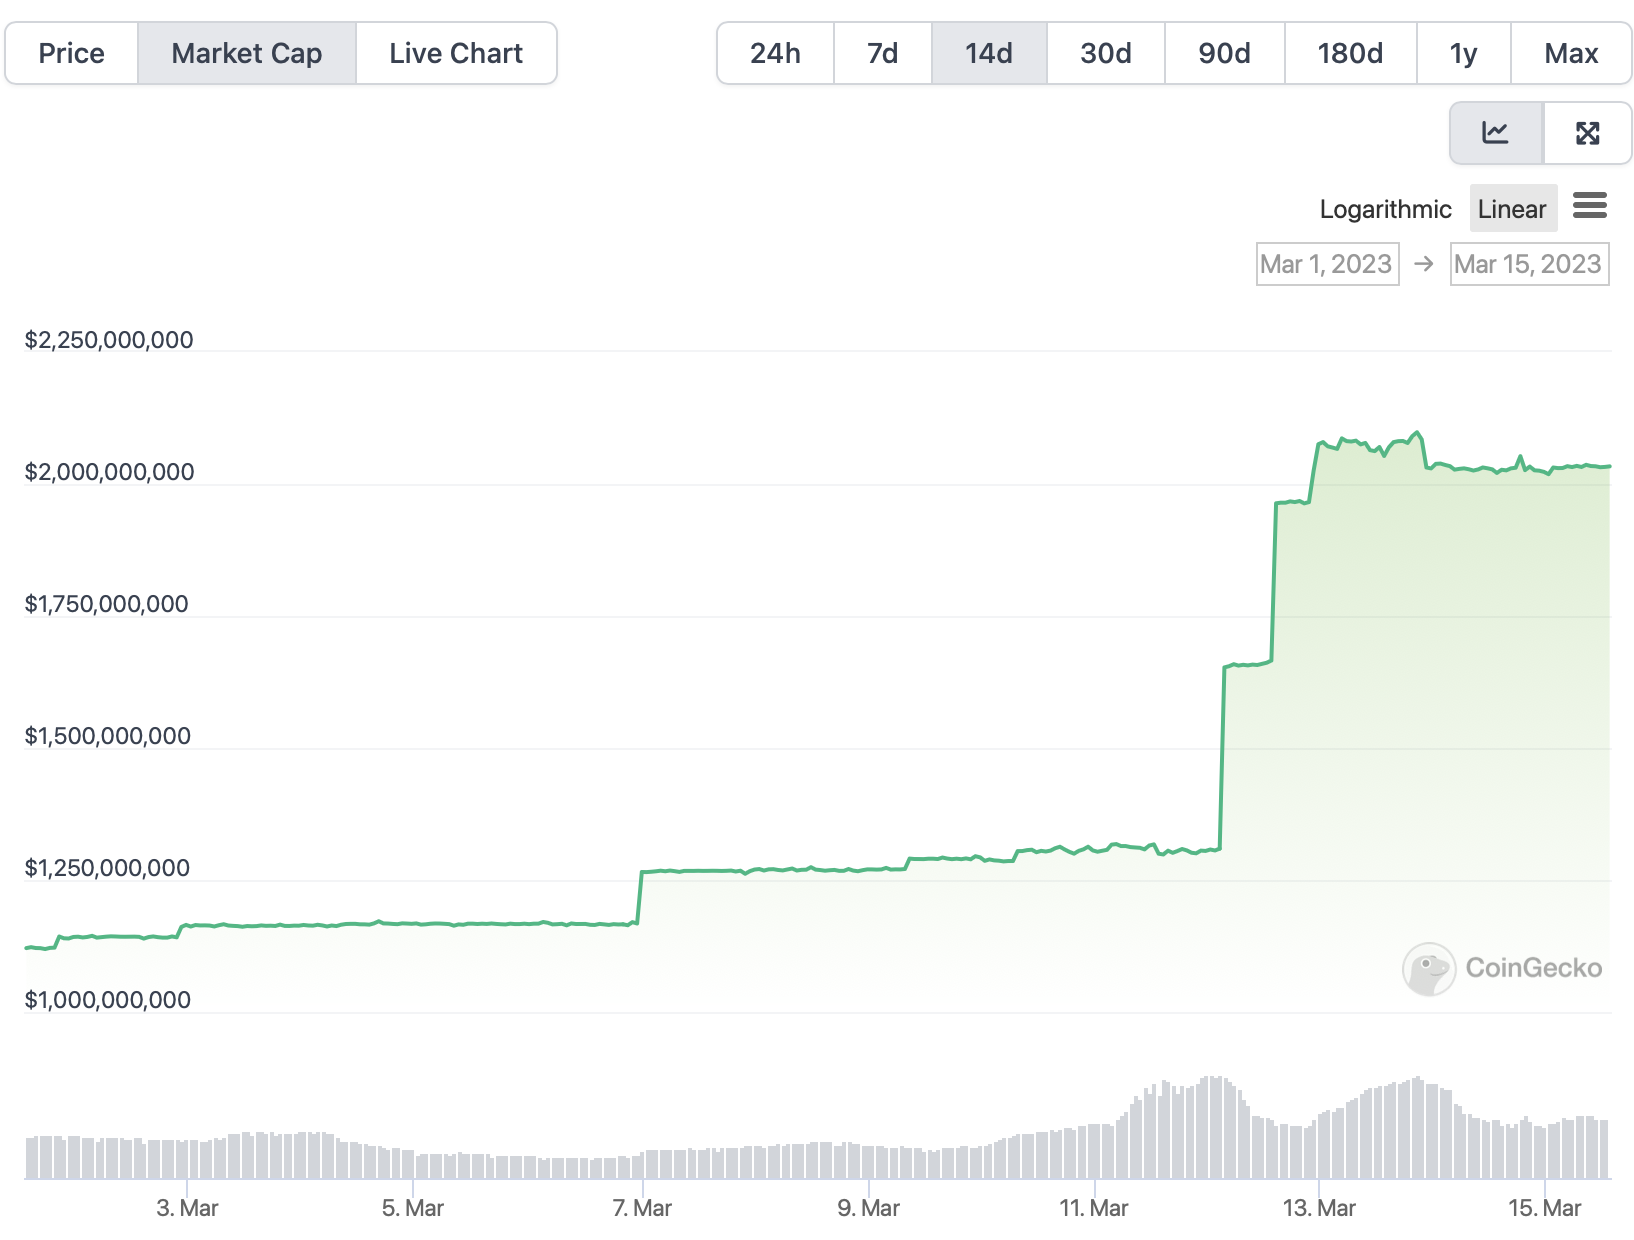 TUSD market cap nearly doubled over the weekend